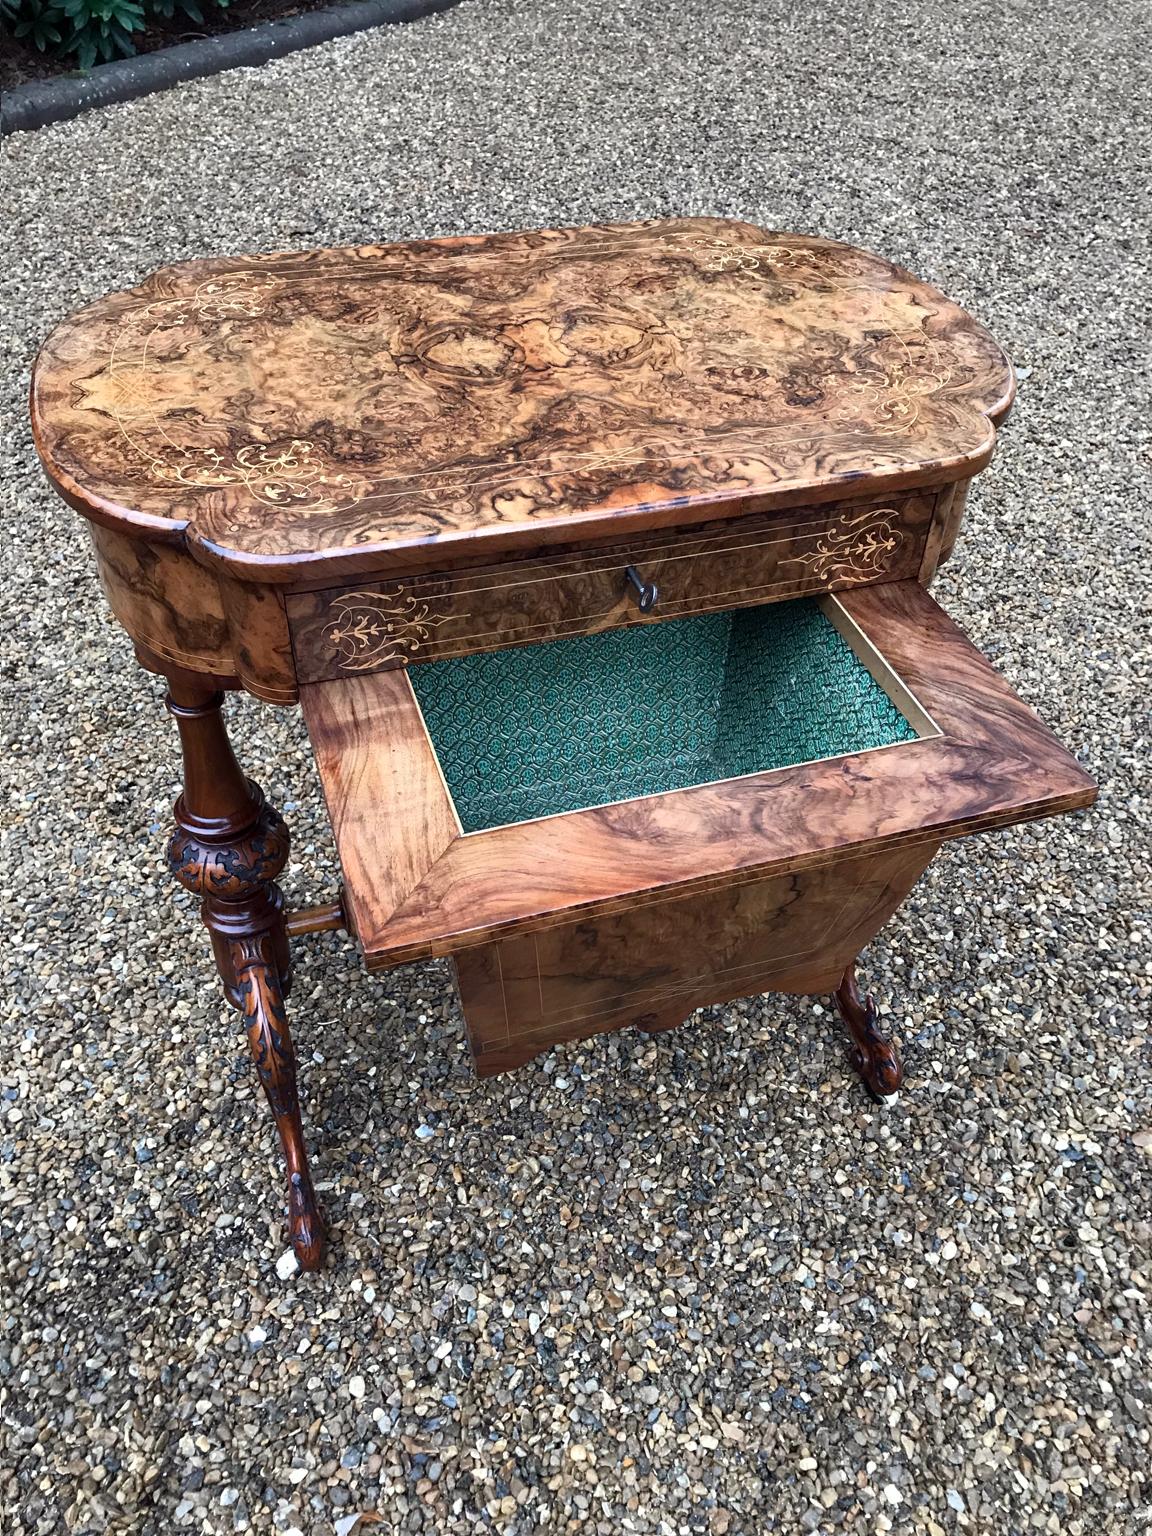 19th Century Burr Walnut and Marquetry Work Table In Good Condition In Richmond, London, Surrey